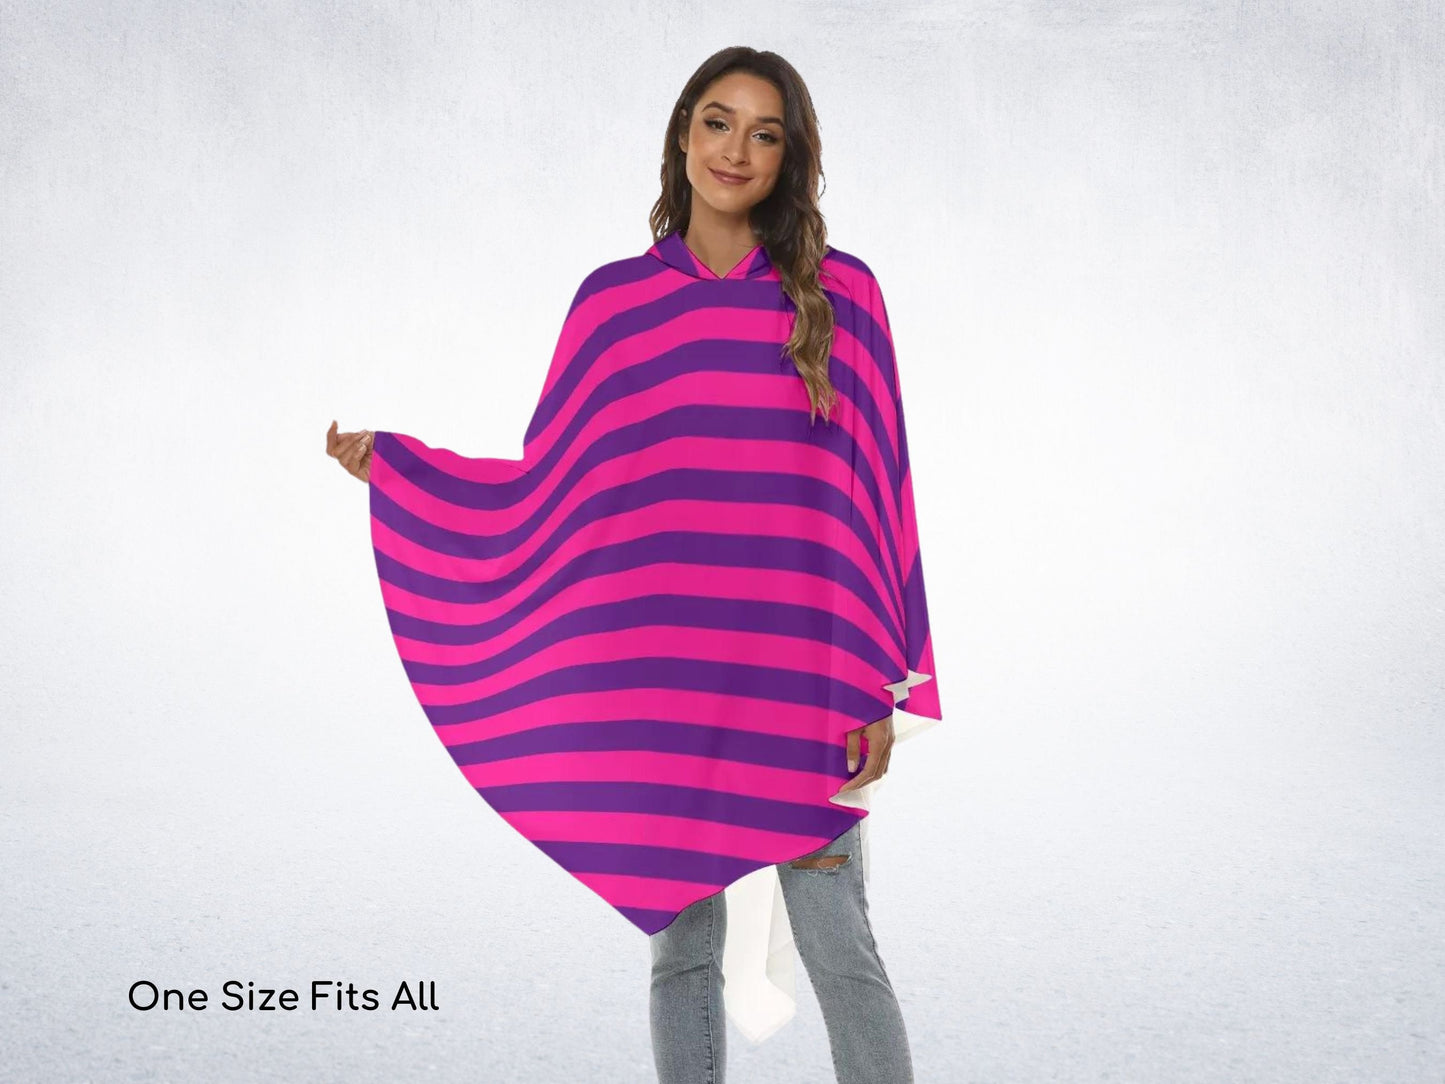 Cheshire Cat Alice in Wonderland Lightweight Cloak with Hood, Poncho, Mad Hatter, Halloween Adult Costume, Cosplay